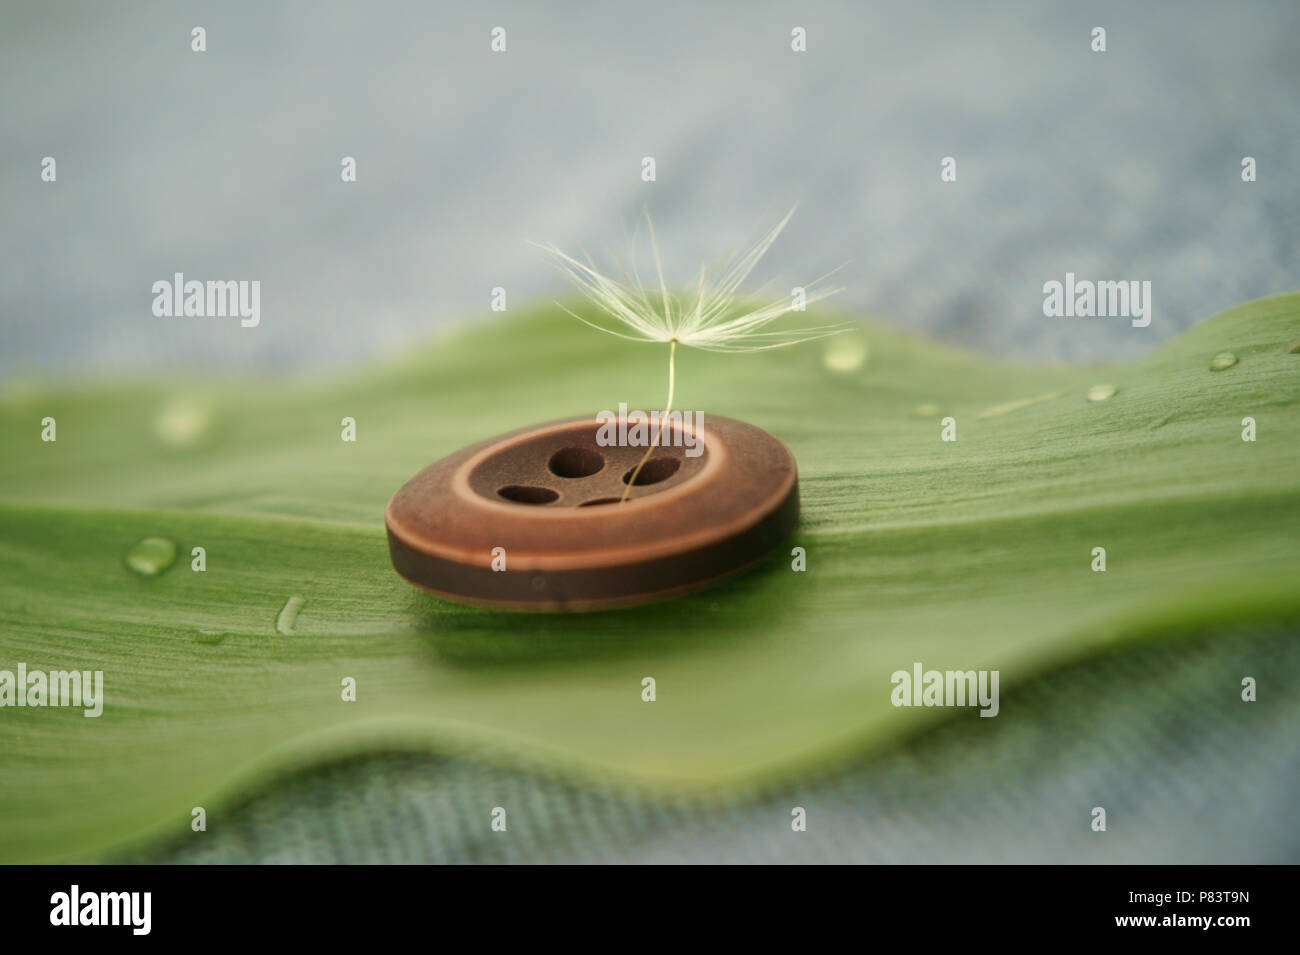 Single delicate dandelion seed attached to a wooden clothes button on the green leaf with low angle selective focus and copy space Stock Photo